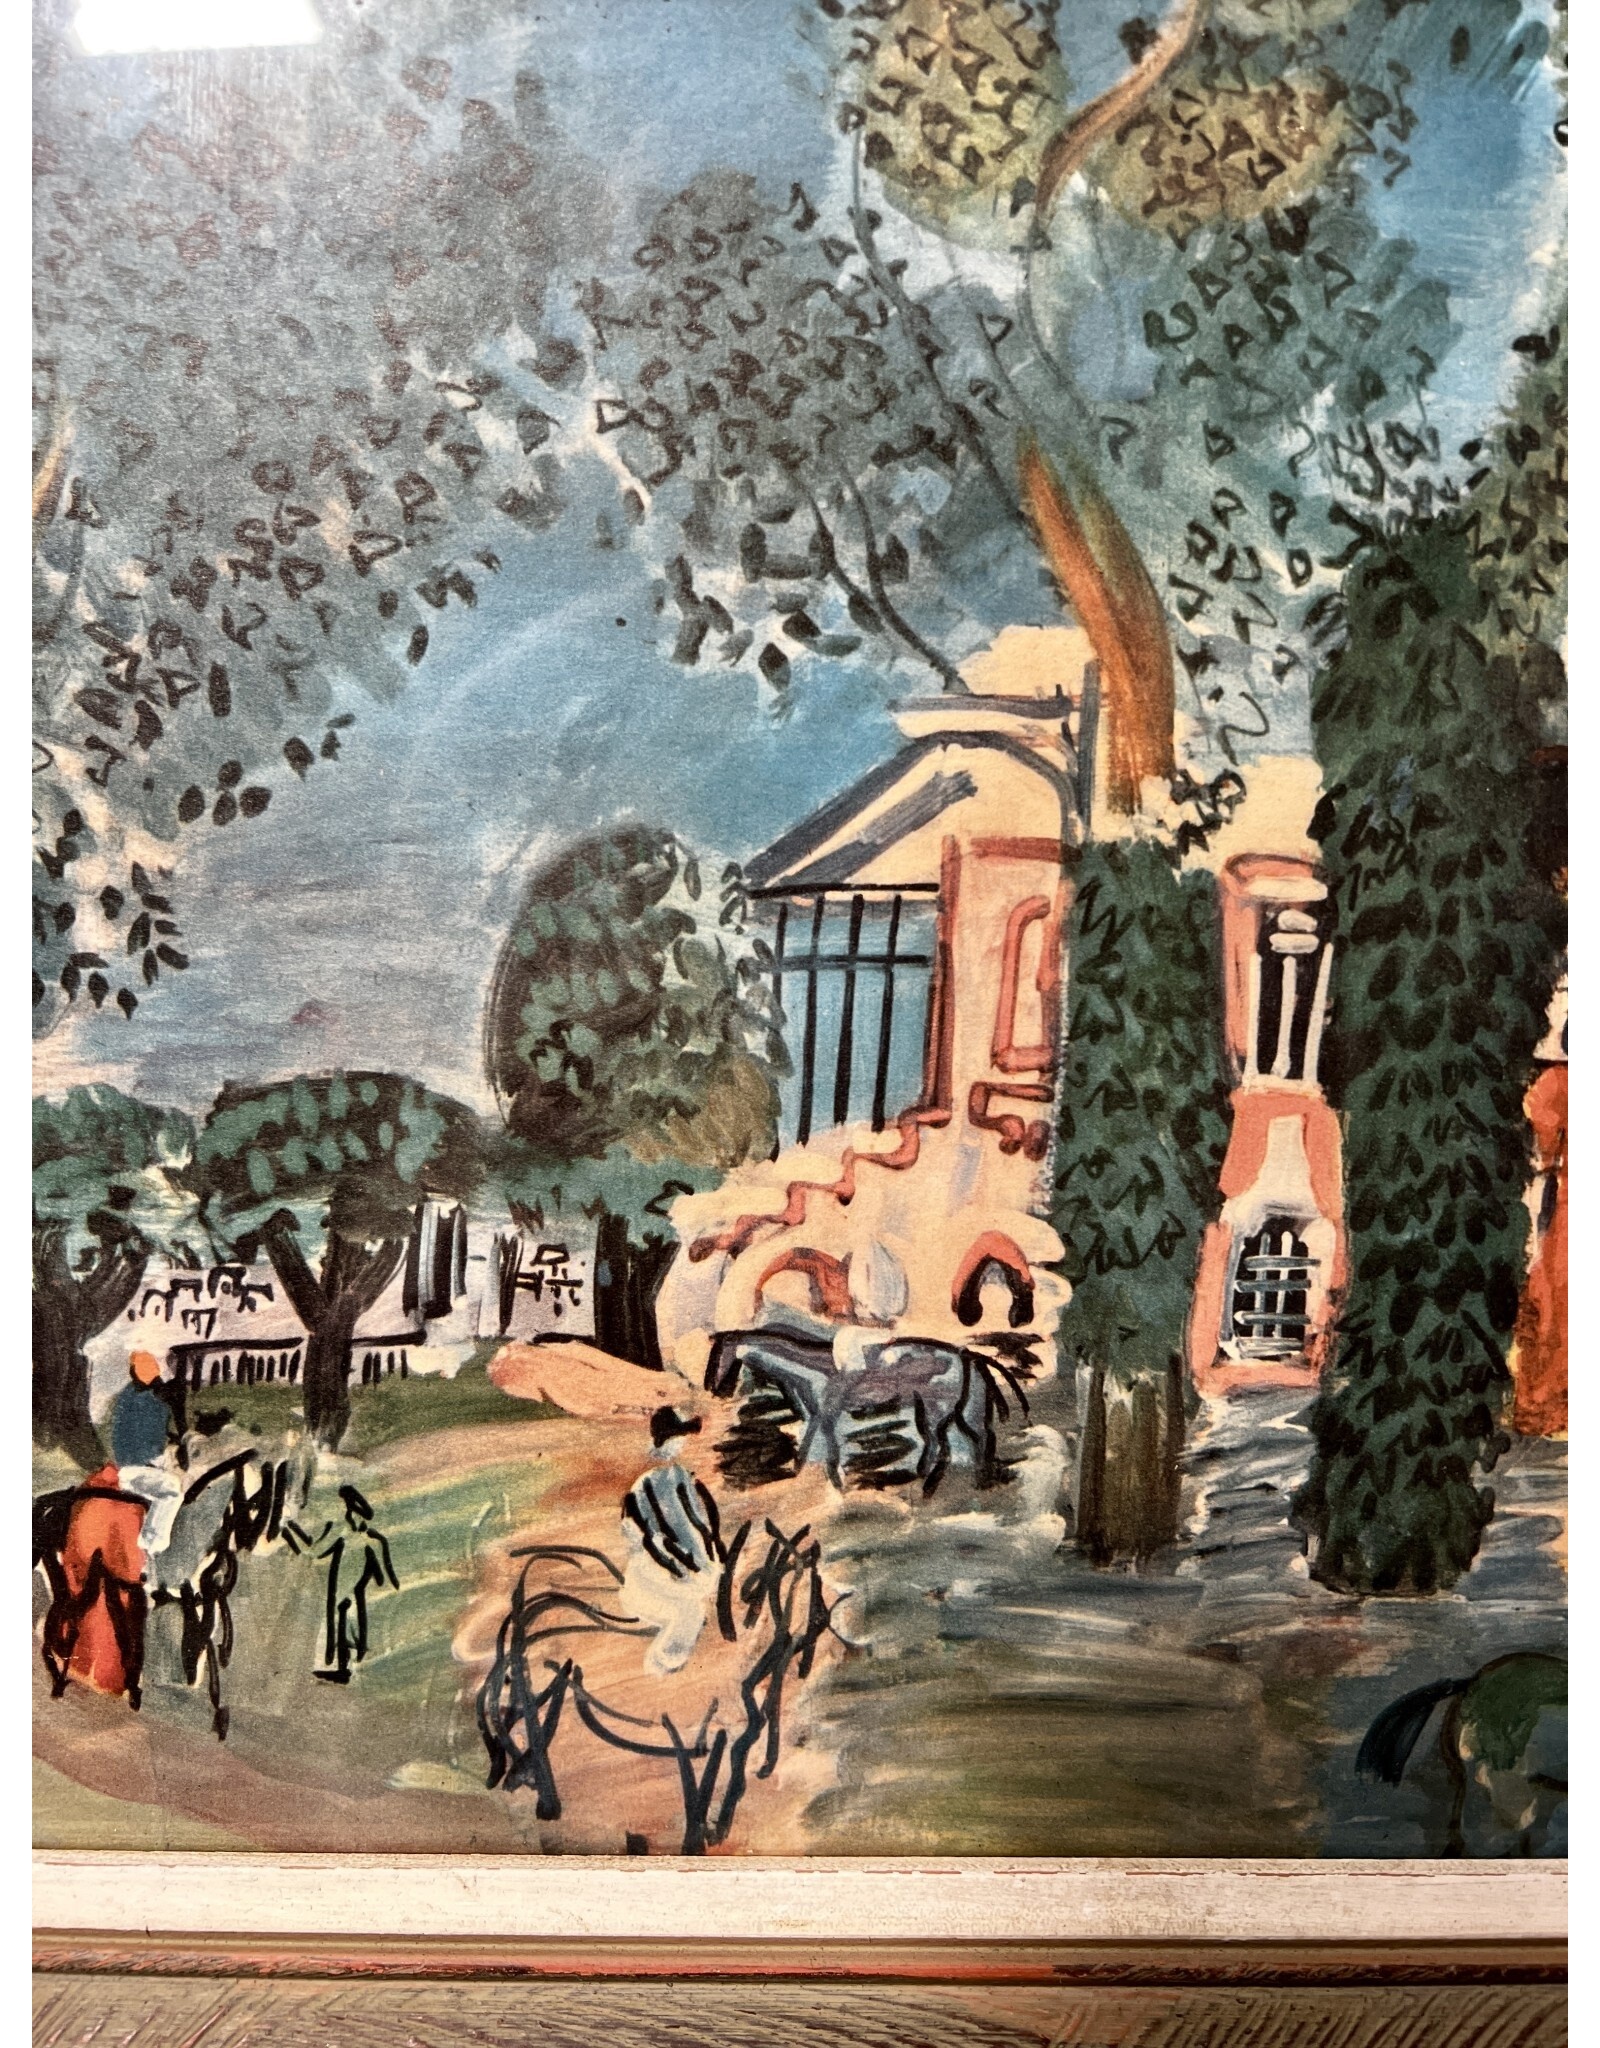 Paddock at Deau by Raoul Dufy framed print